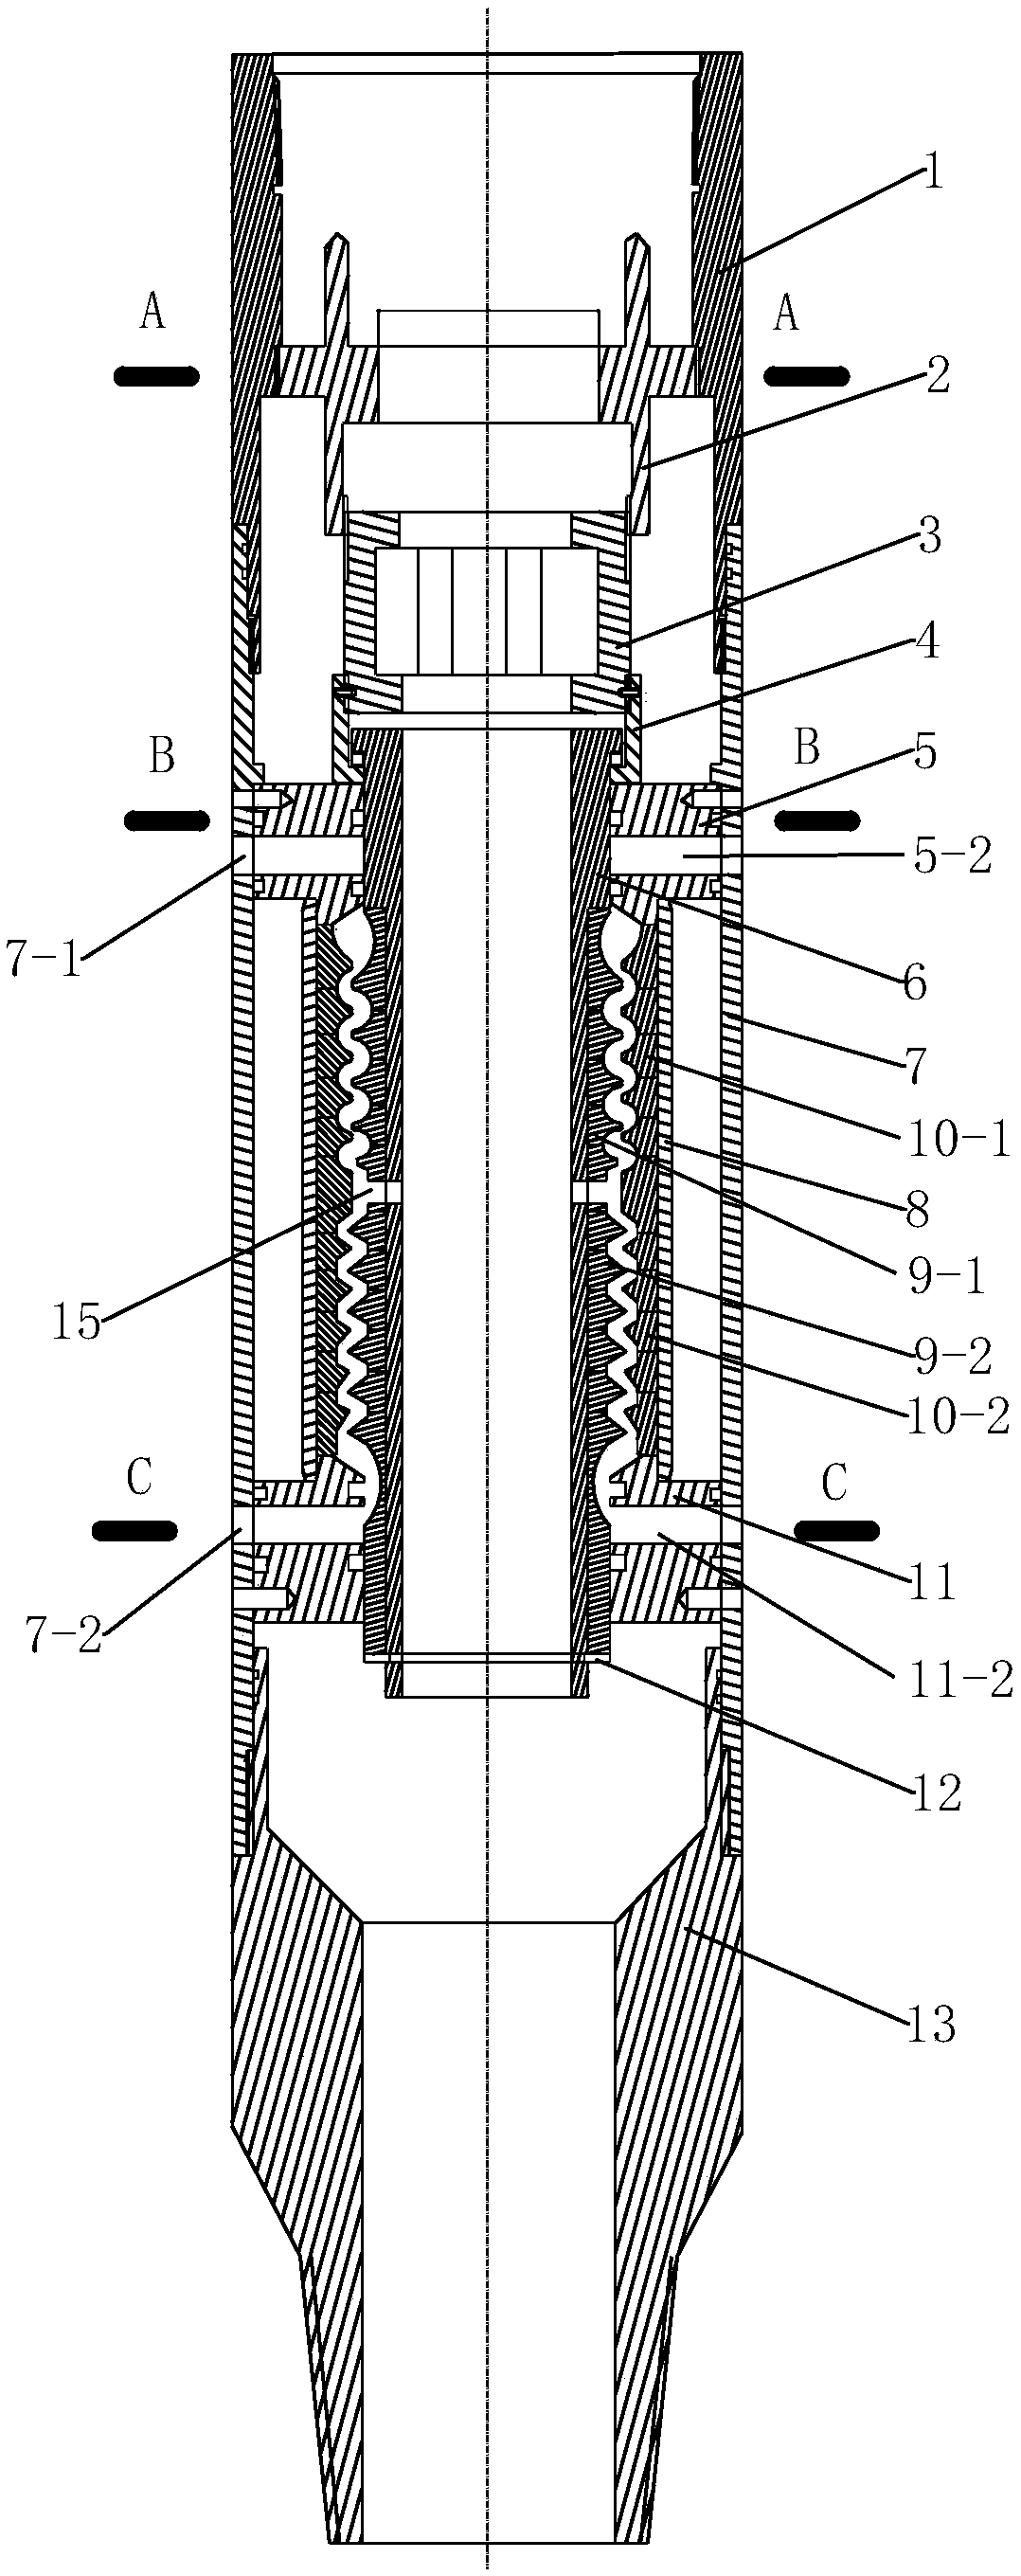 Downhole injection device being able to change polymer viscosity